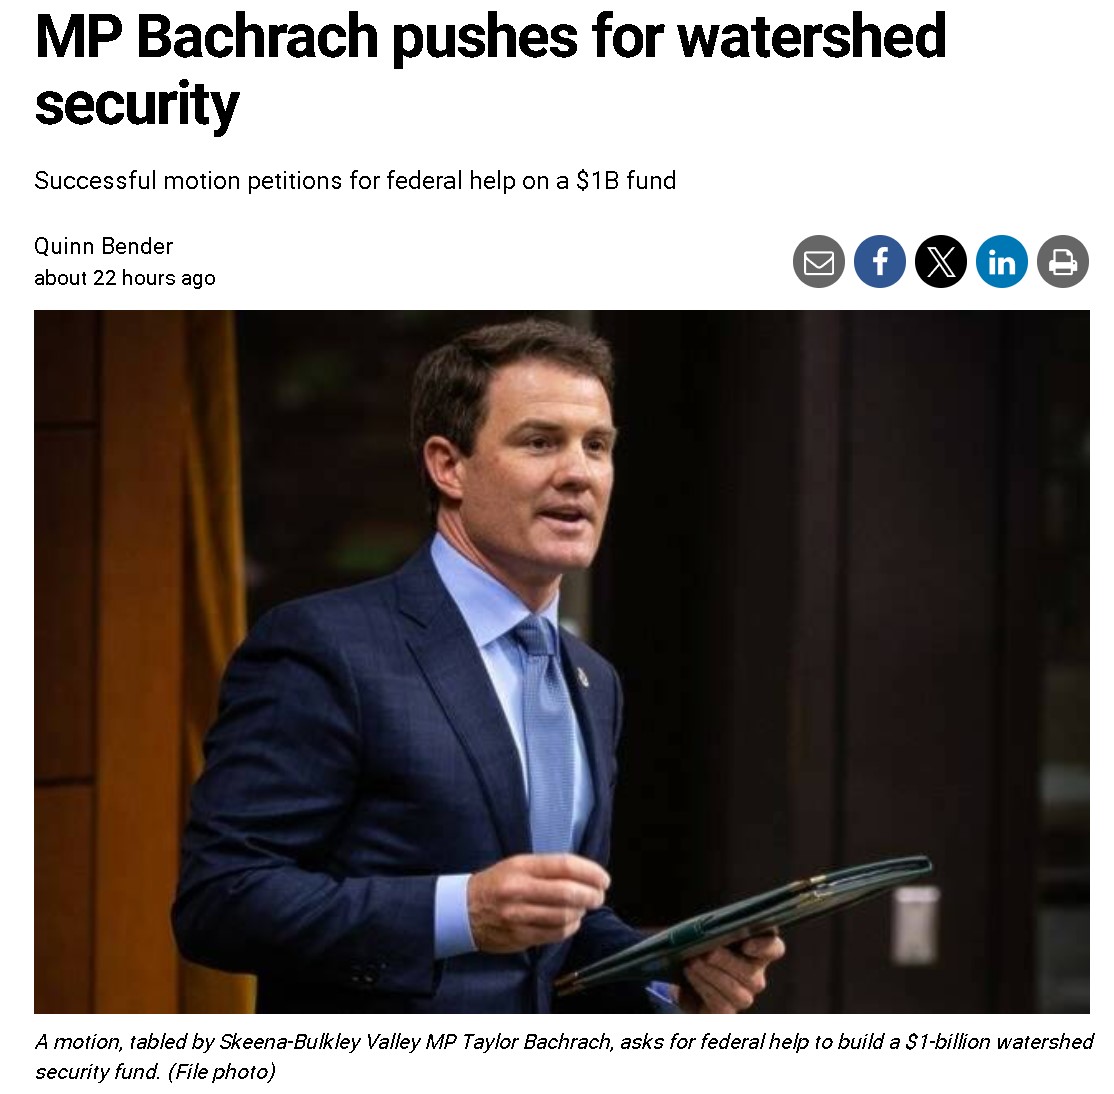 MP Bachrach pushes for watershed security? More wool over our eyes?